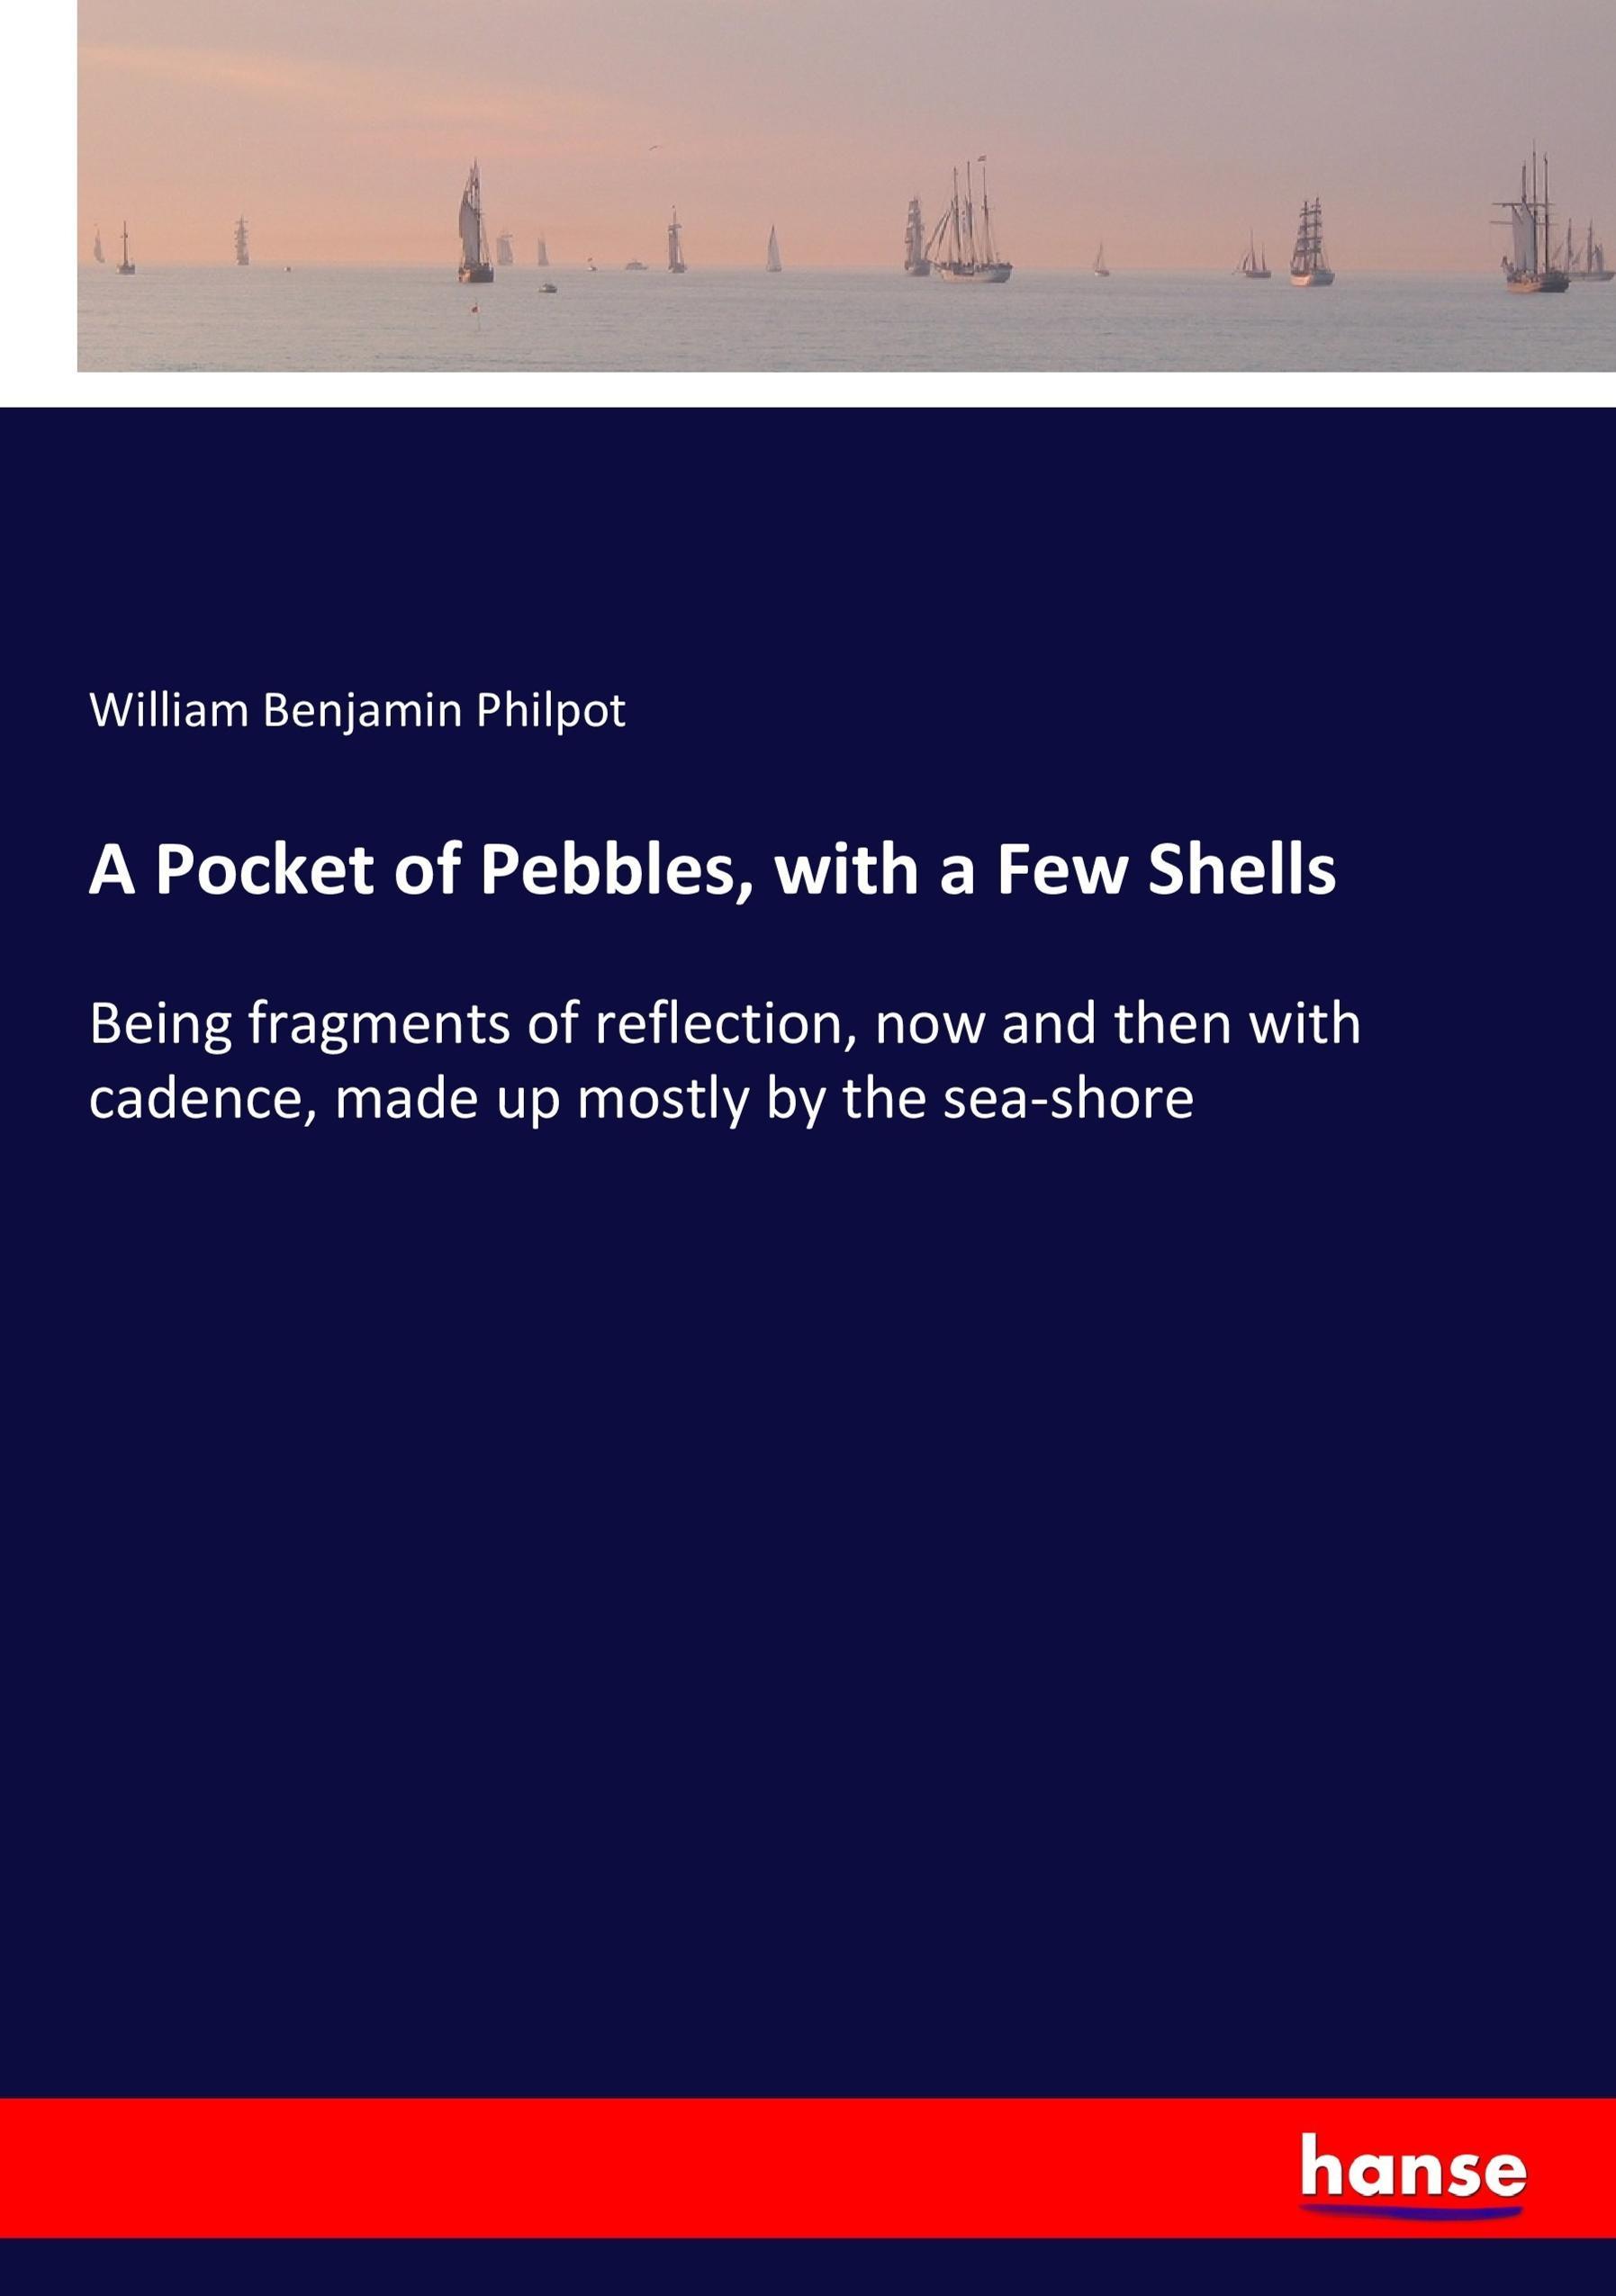 A Pocket of Pebbles, with a Few Shells | Being fragments of reflection, now and then with cadence, made up mostly by the sea-shore | William Benjamin Philpot | Taschenbuch | Paperback | 264 S. | 2017 - Philpot, William Benjamin